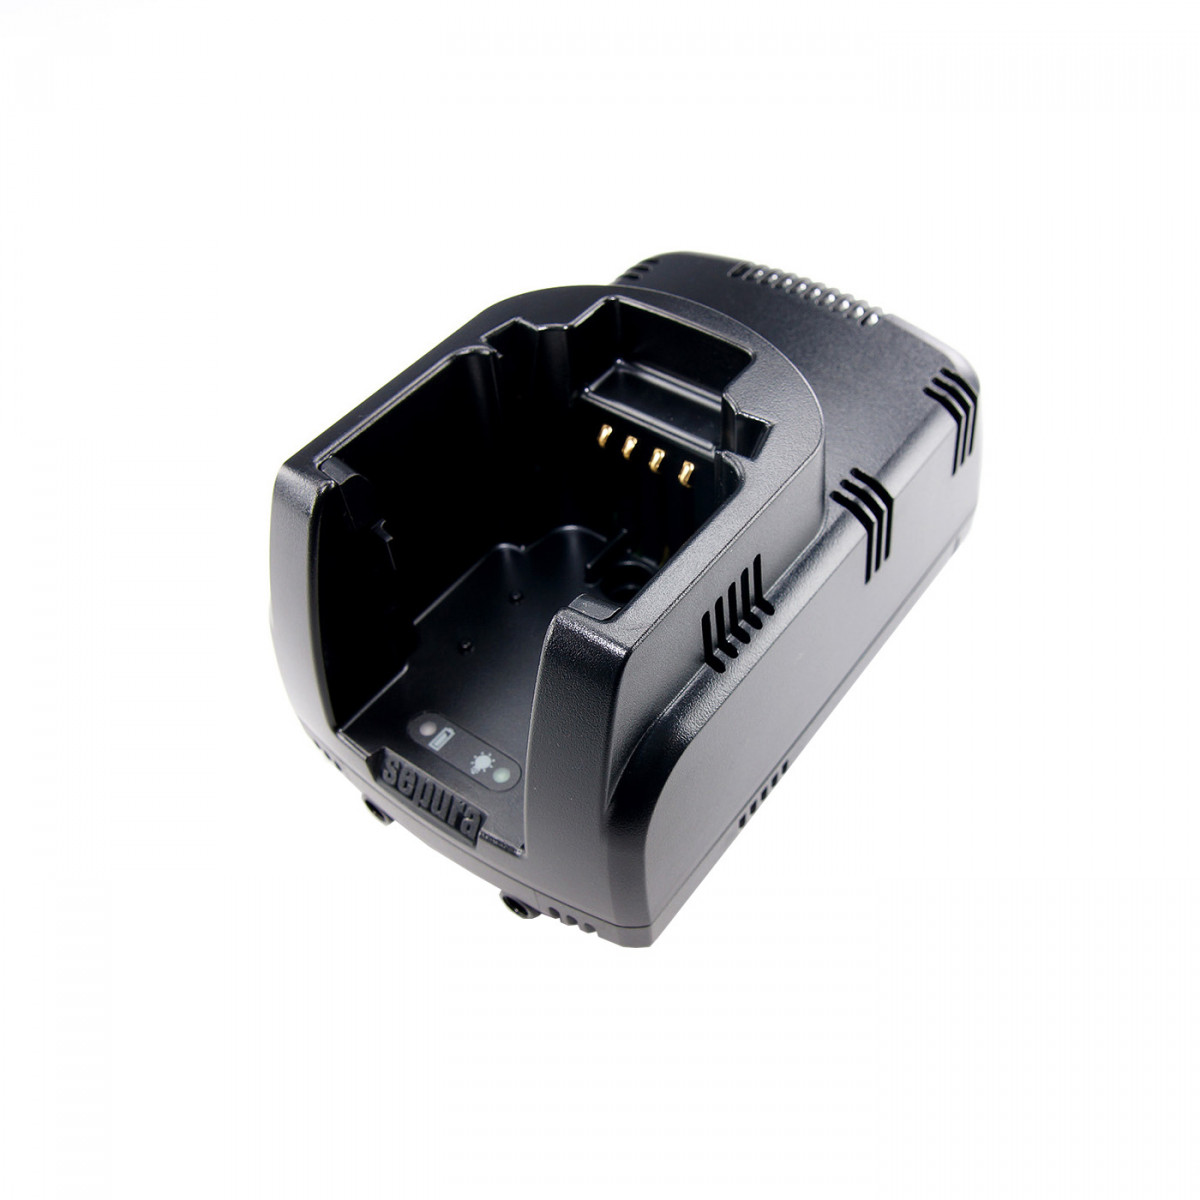 SEPURA 6-fold charger, 230 V, for device with rechargeable battery or single battery for Sepura STP8X 41800972